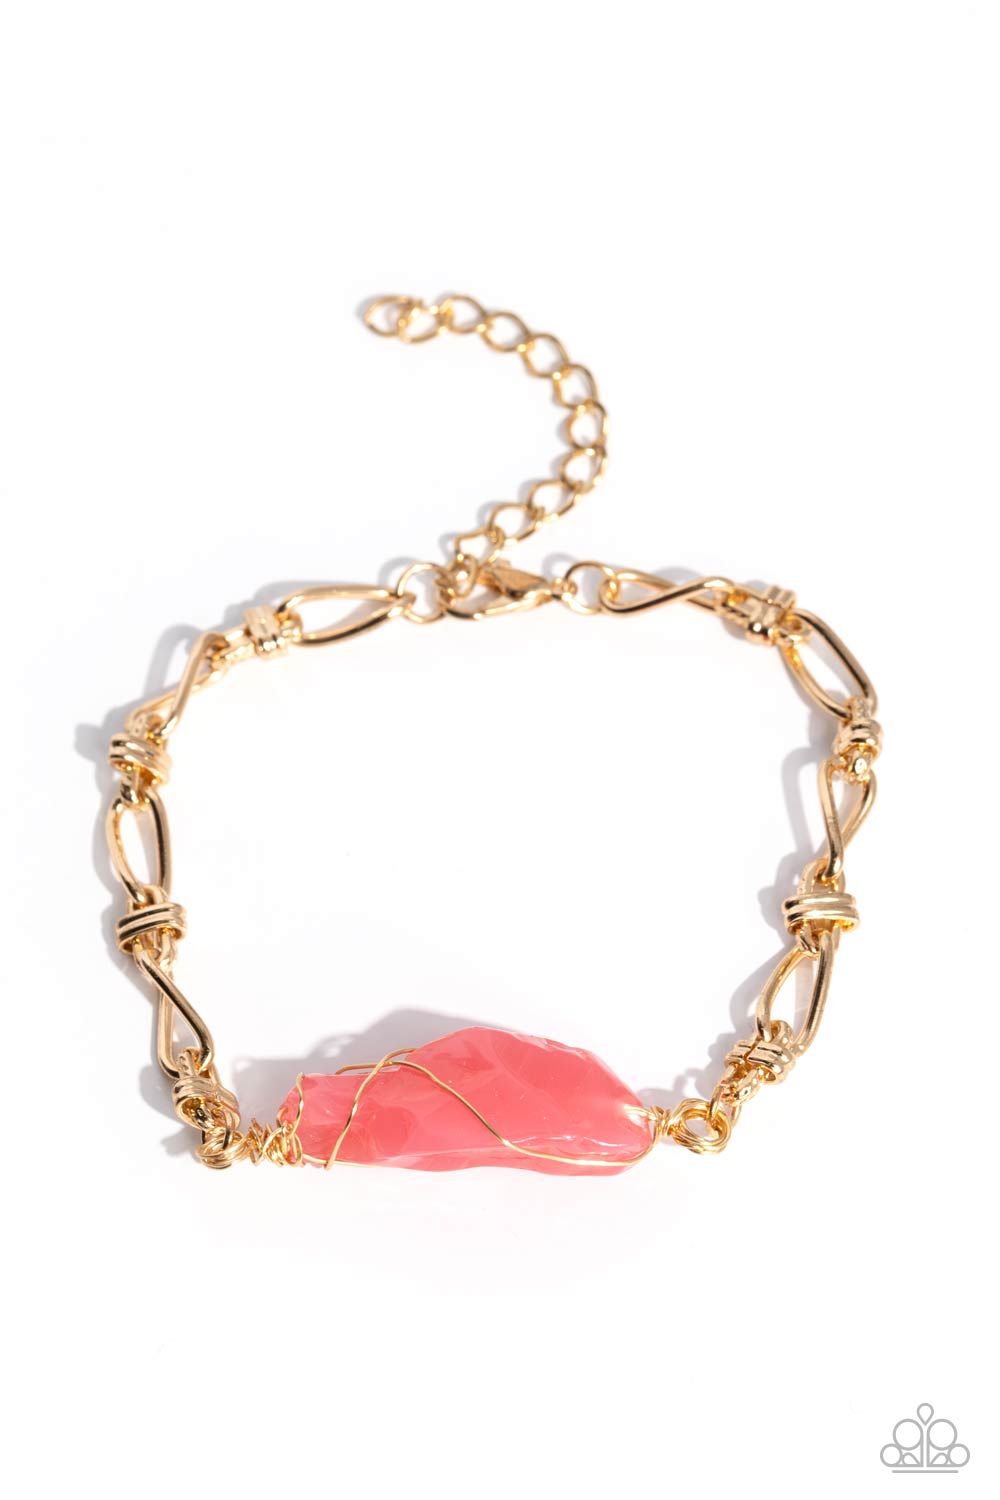 five-dollar-jewelry-whimsically-wrapped-pink-bracelet-paparazzi-accessories